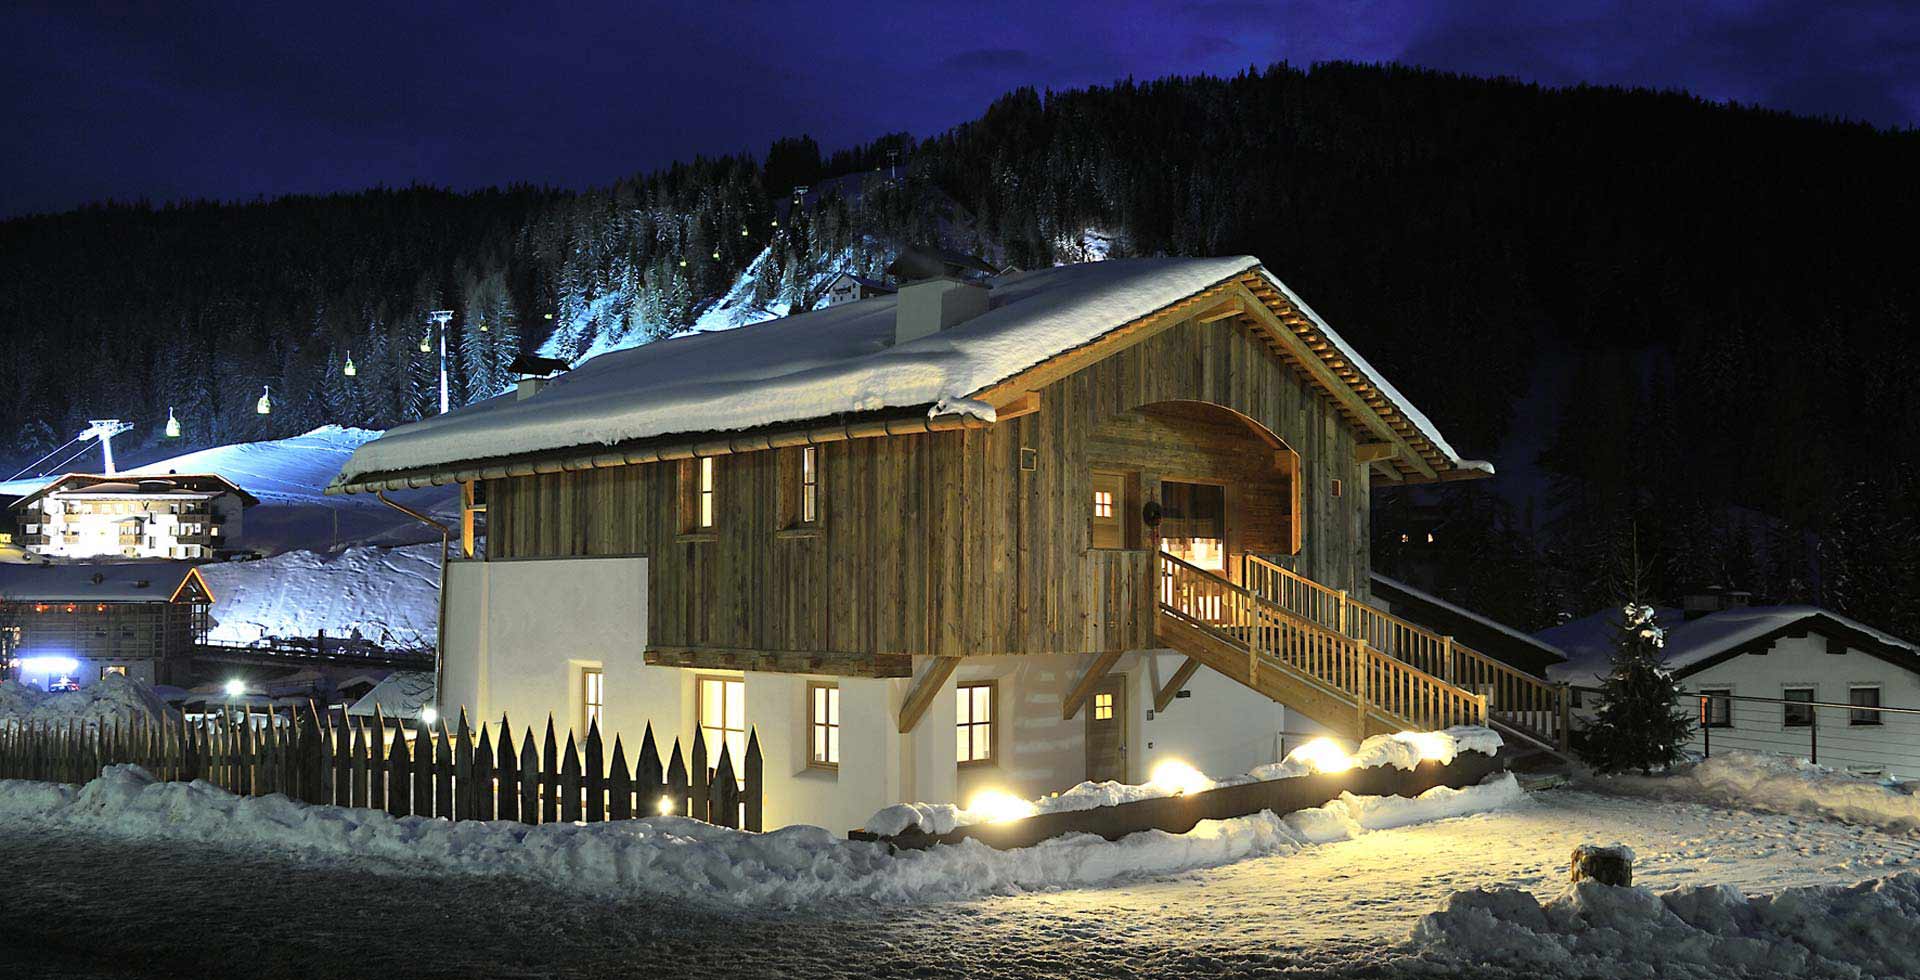 Chalet very close to slopes - Dolomites Chalet